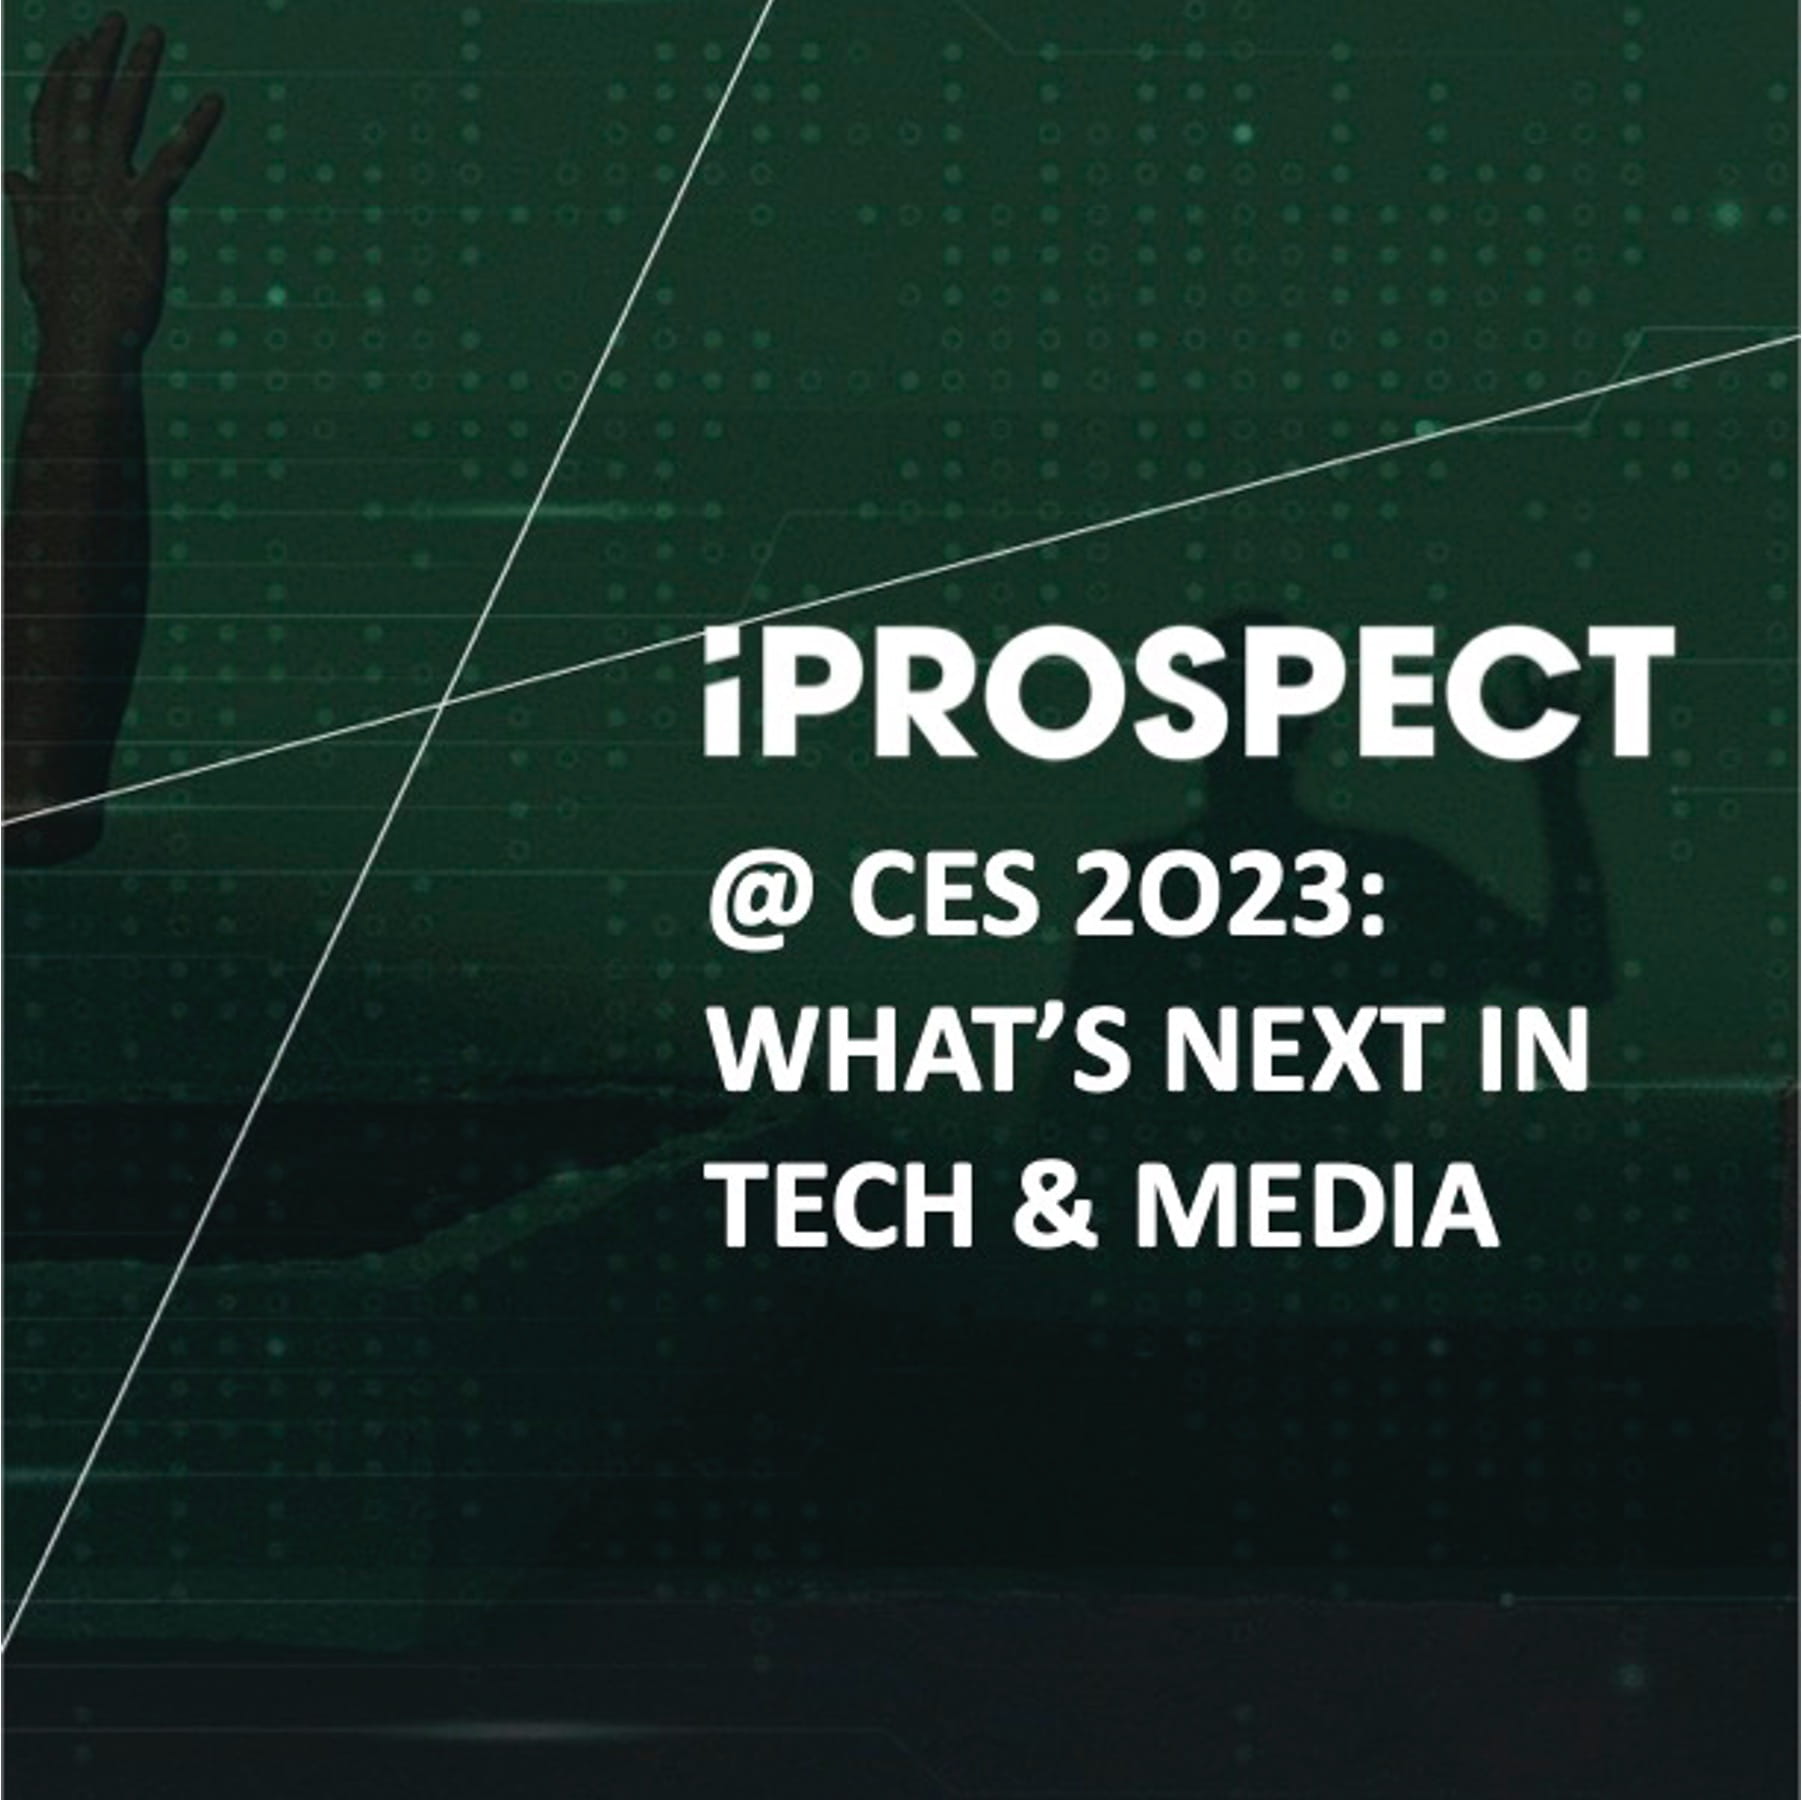 iProspect @ CES 2023: What's Next In Tech & Media